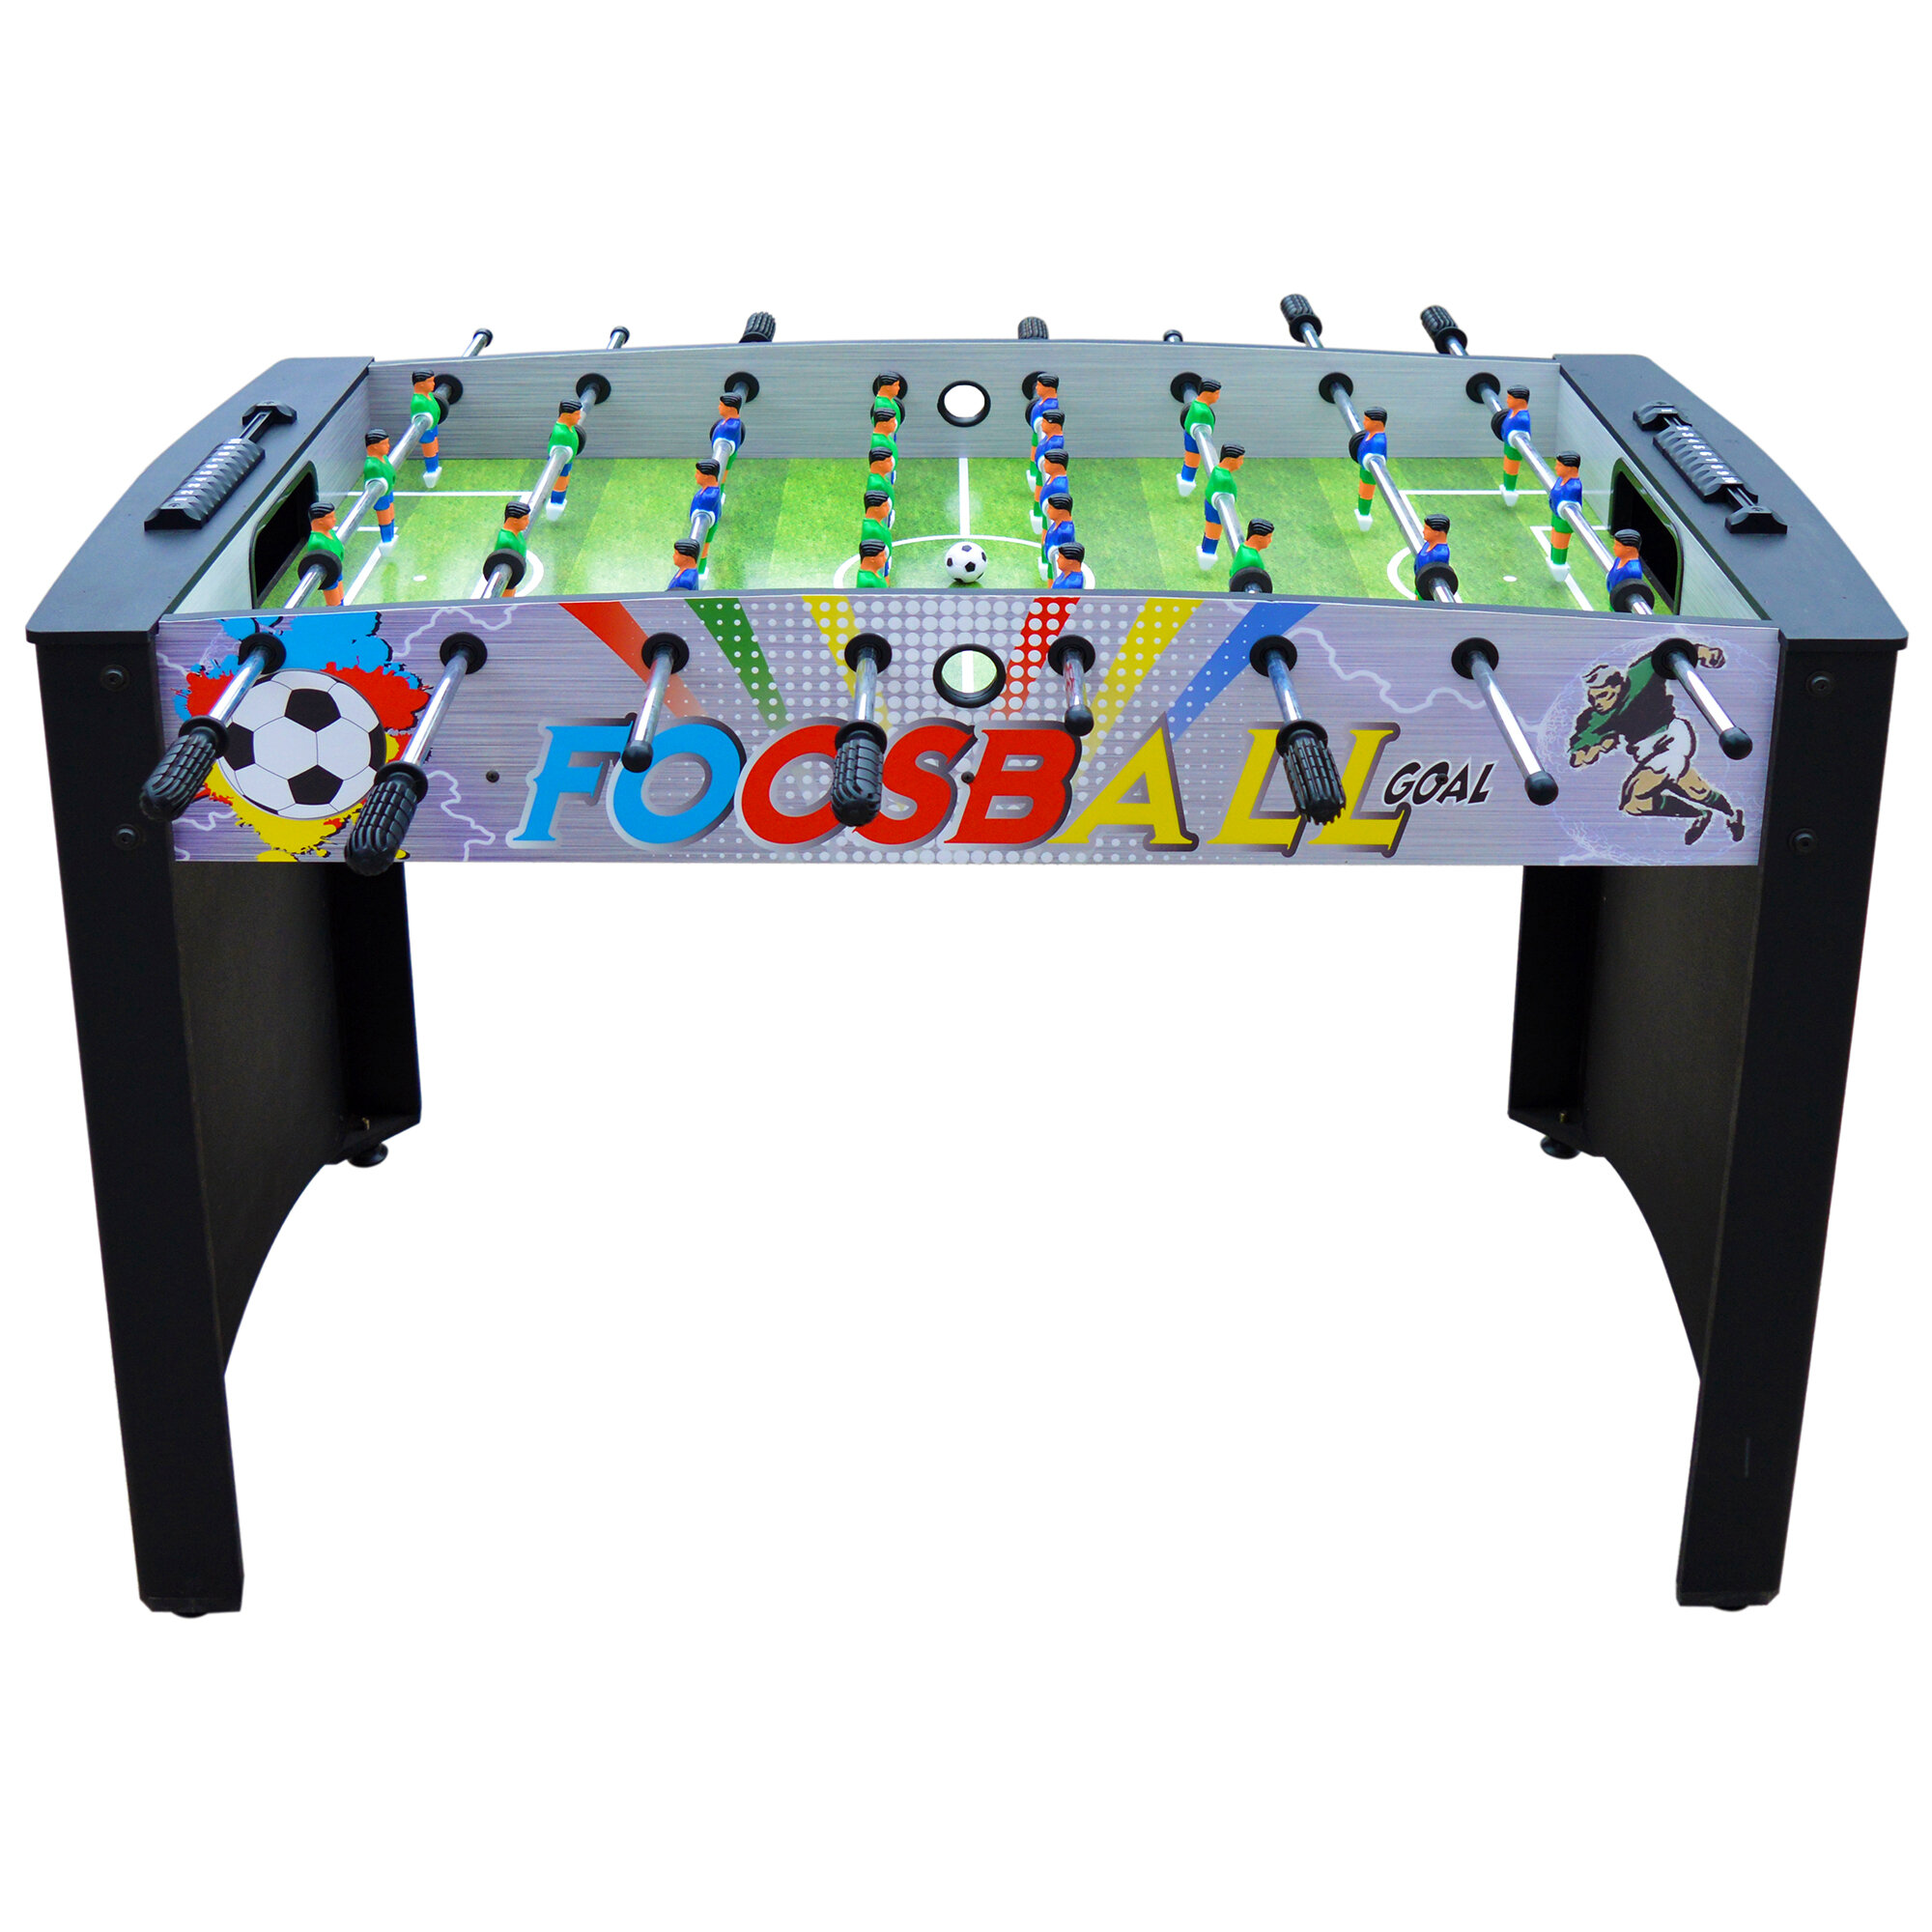 Tournament Soccer Rounded Foot Red Foosball Table Men Set of 11 